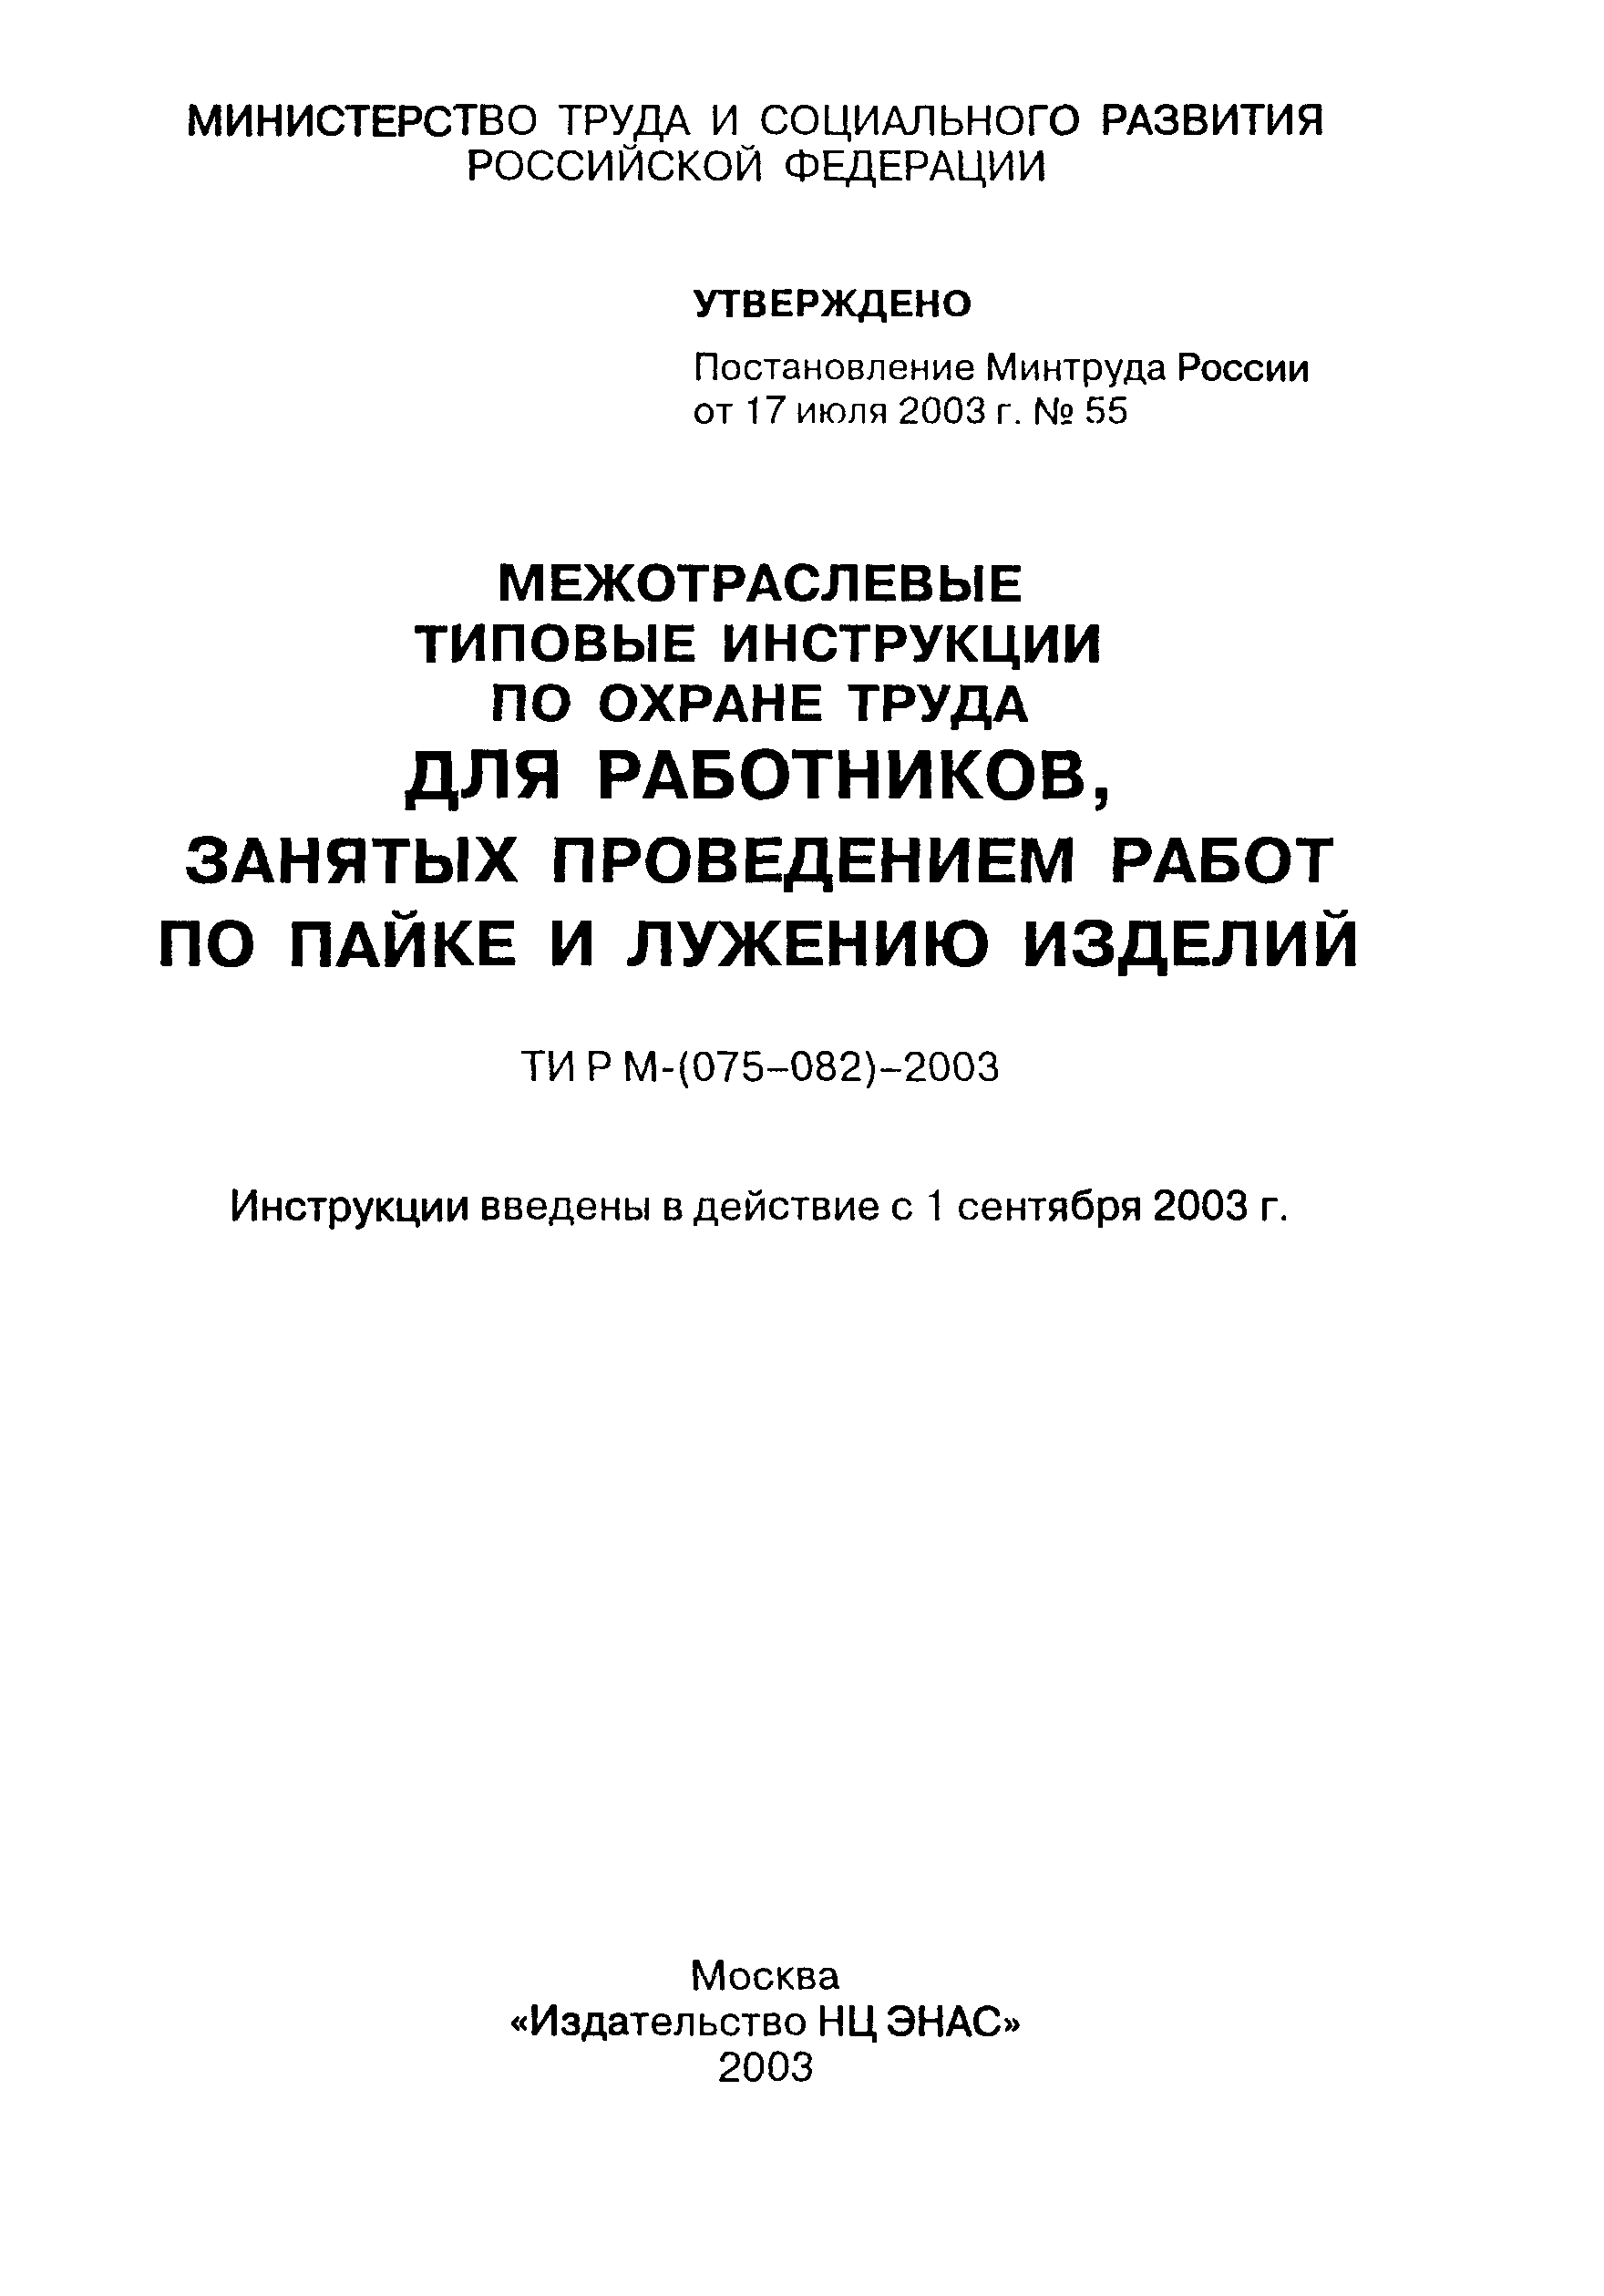 ТИ Р М-079-2003